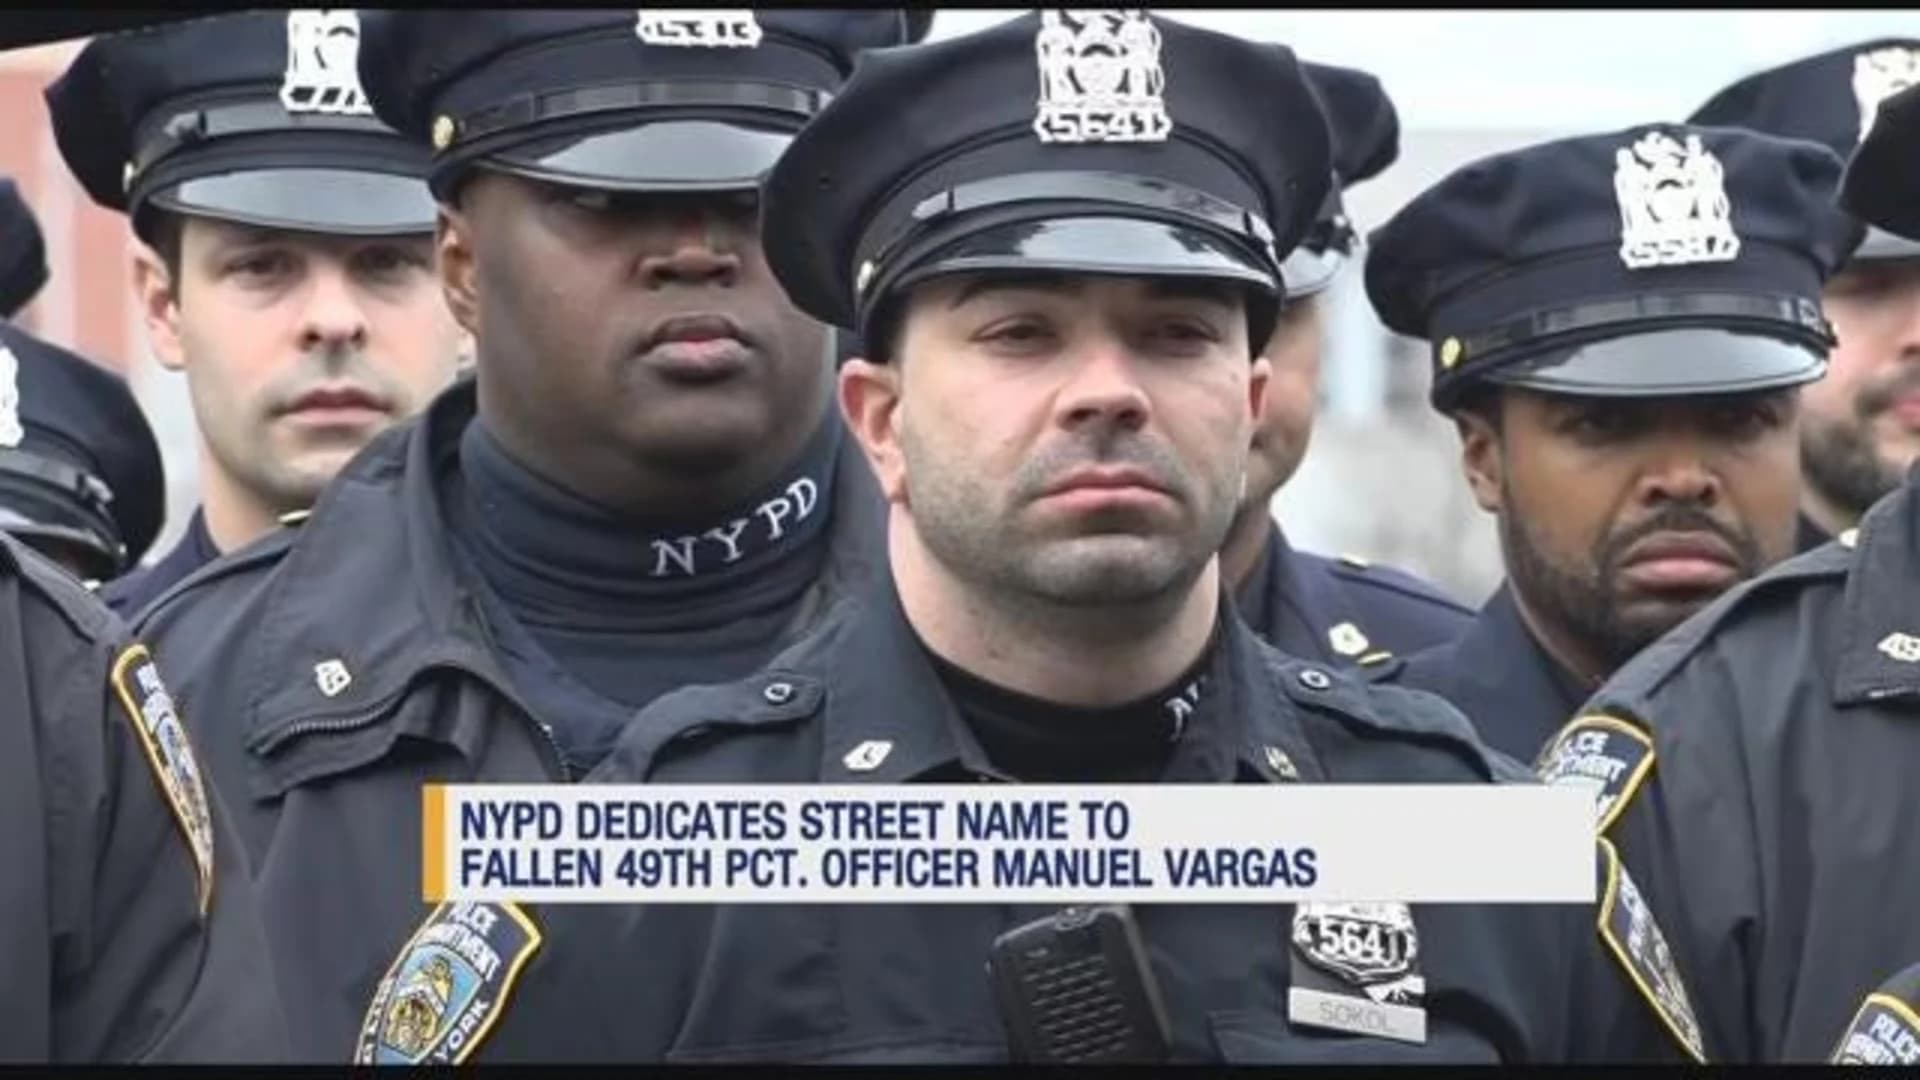 NYPD gathers to honor fallen officer at street dedication